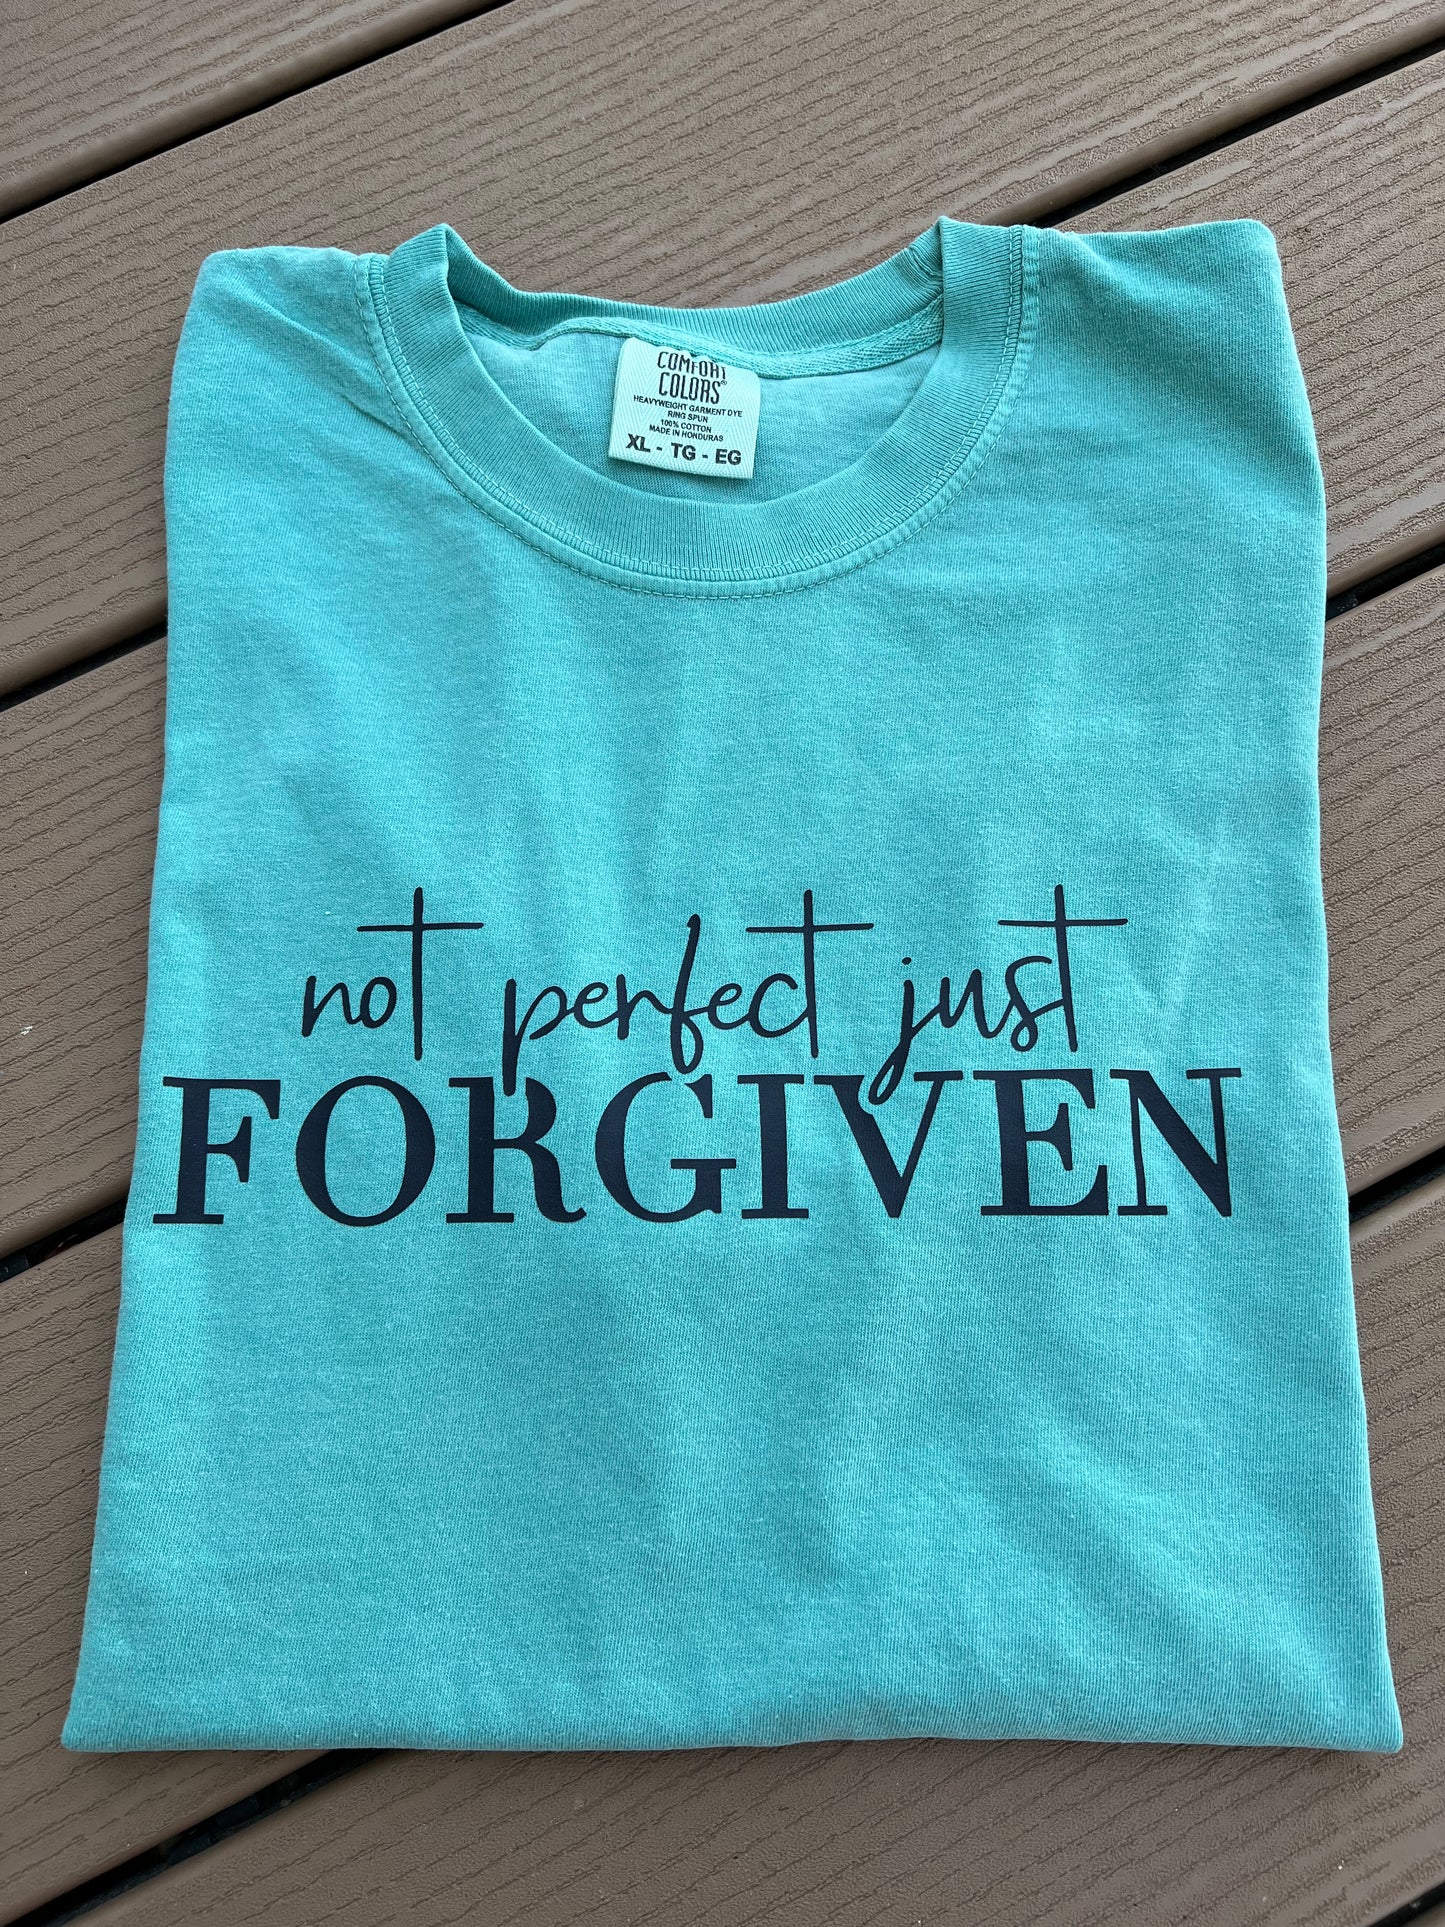 not perfect just FORGIVEN